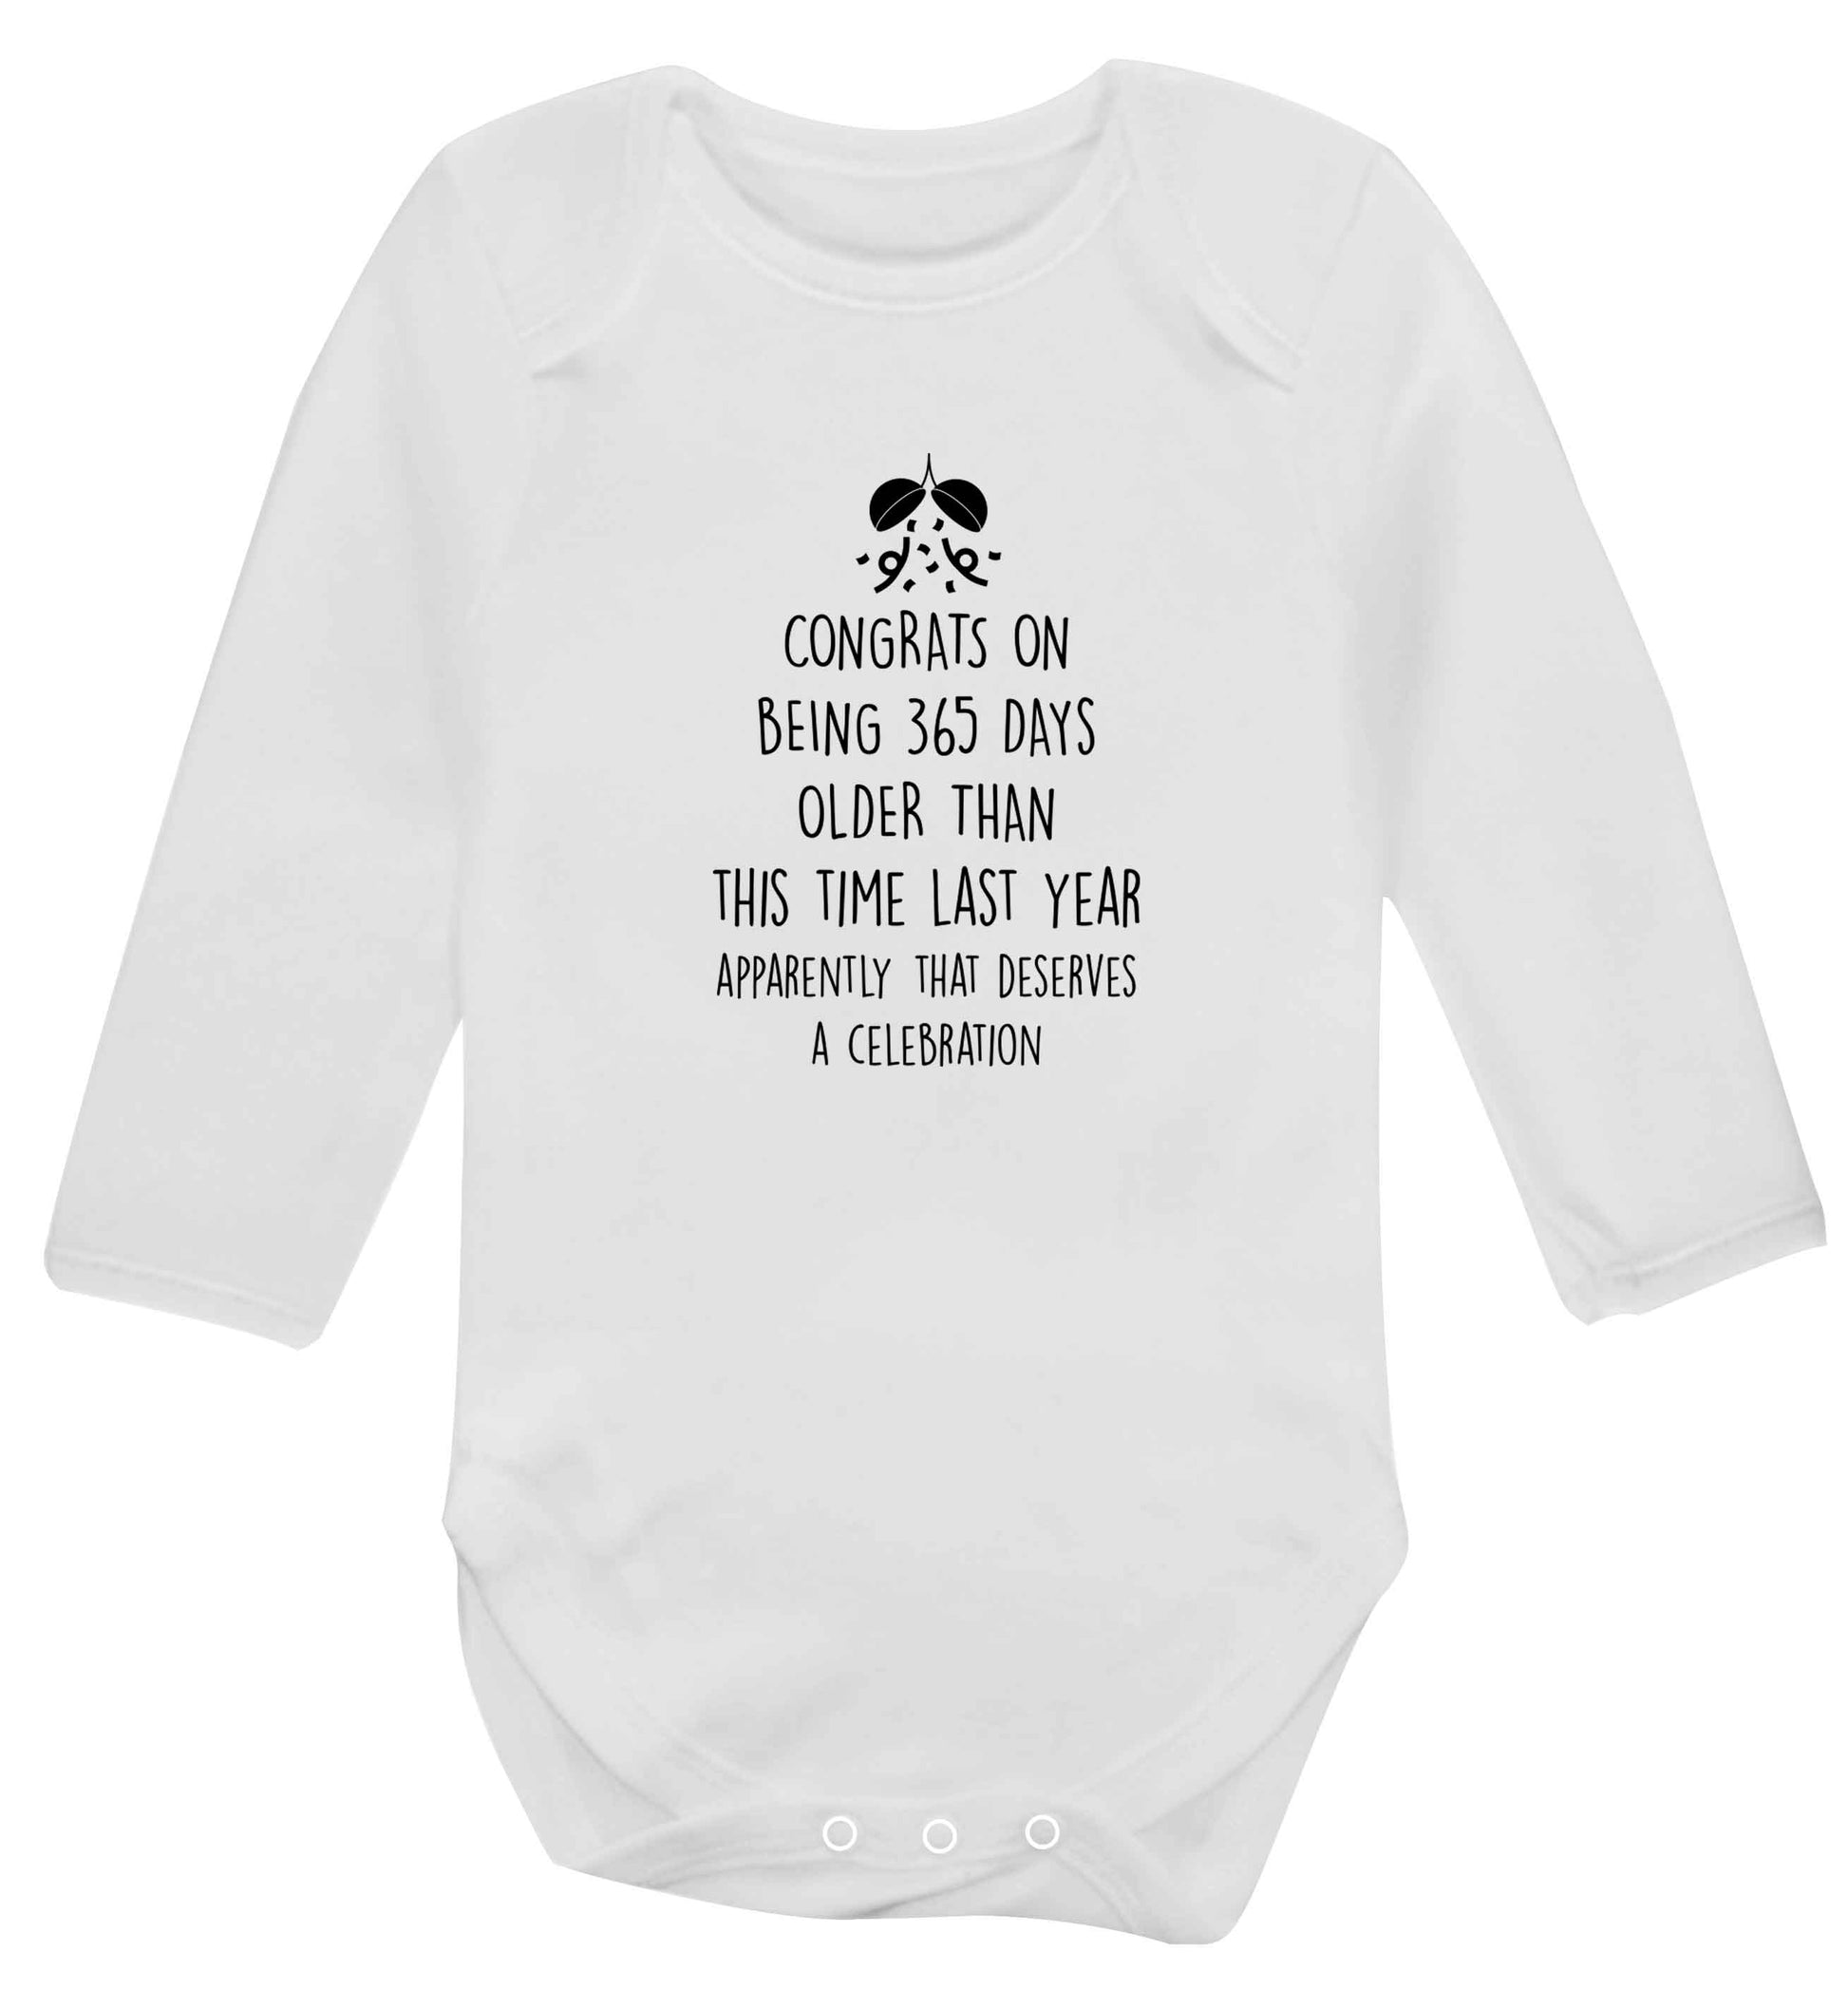 Congrats on being 365 days older than you were this time last year apparently that deserves a celebration baby vest long sleeved white 6-12 months